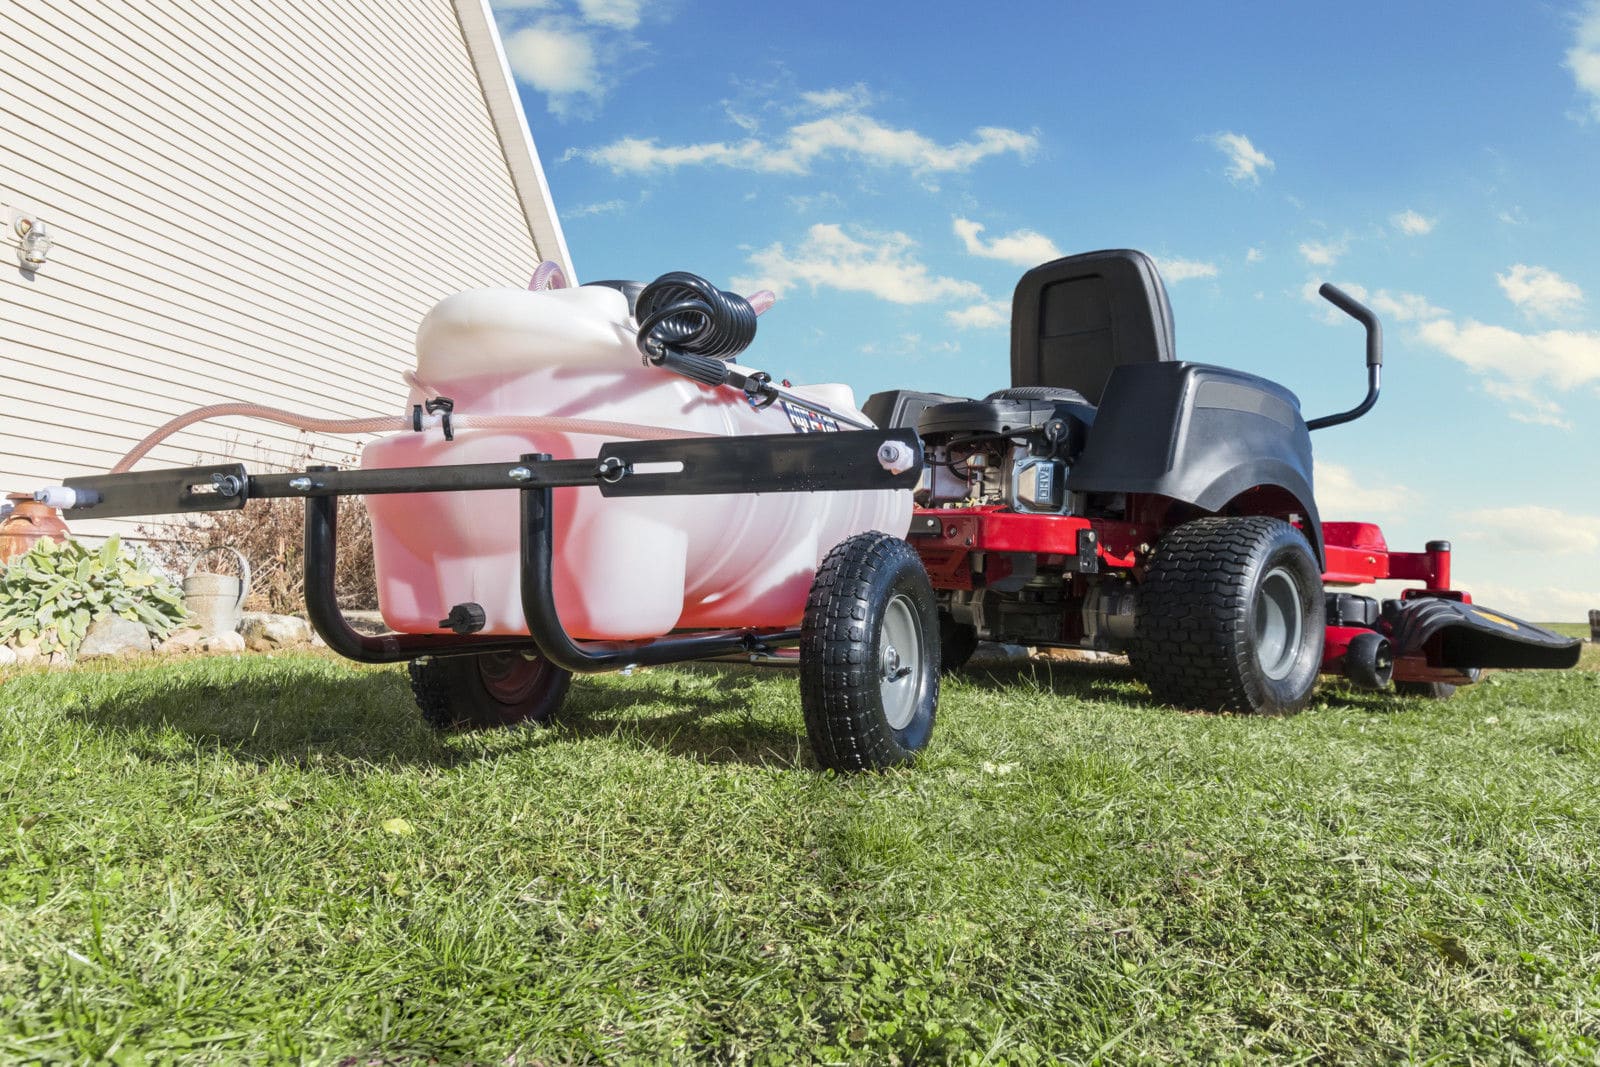 7 Best Tow Behind Sprayers - Relaxing Way To Work! (Summer 2022)